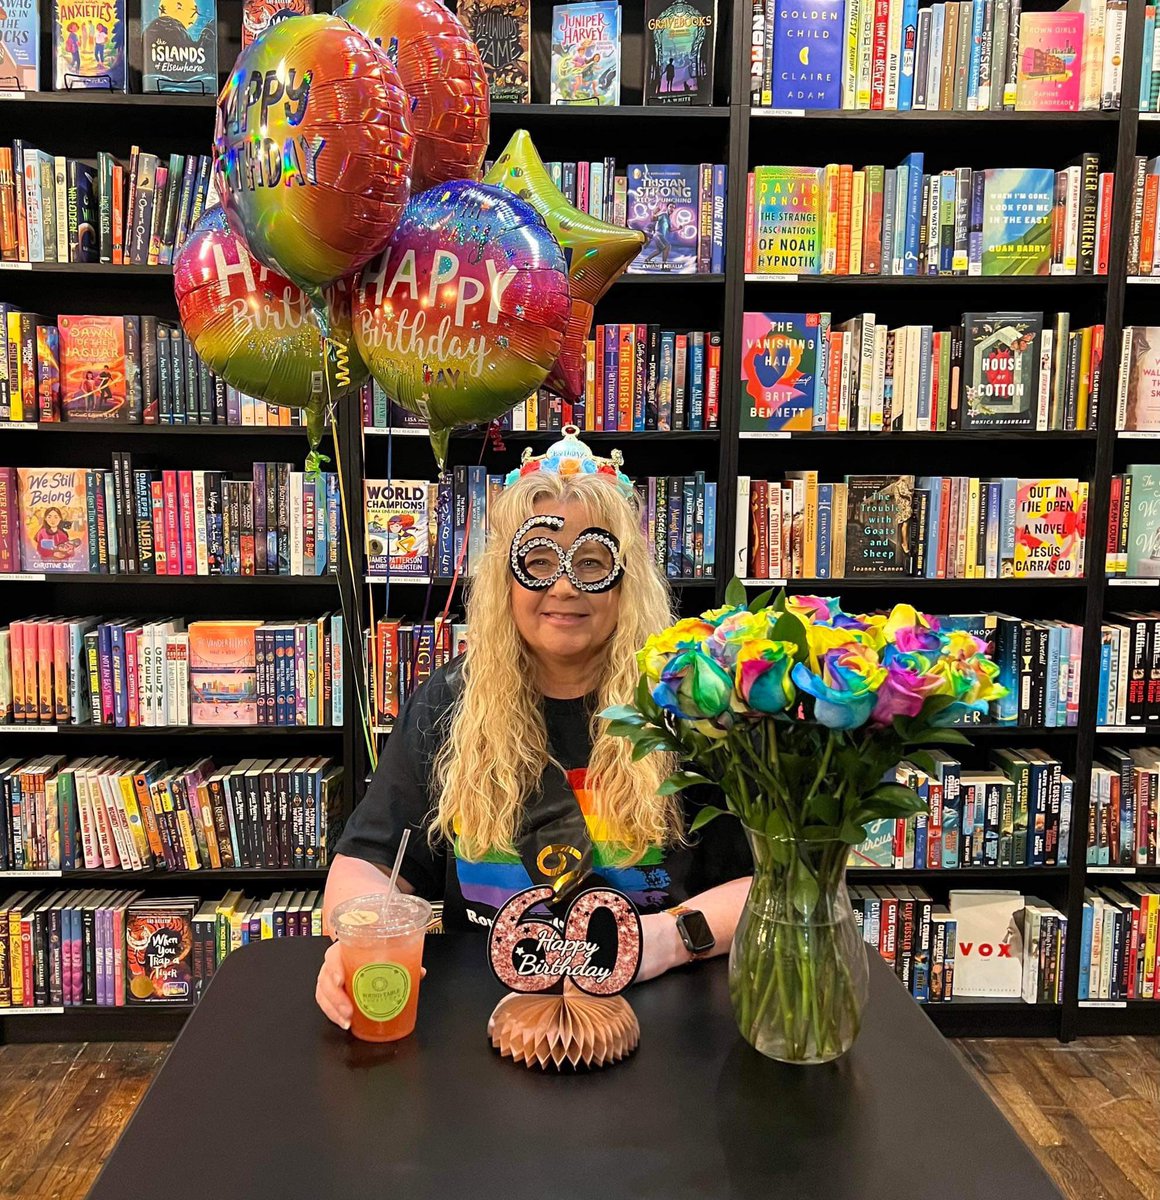 We are having a great time celebrating Donna’s 60th birthday! Come in or comment and join us in celebrating her! 

#bookstoresofinstagram #eatplayshopnoto #indiebookstore #explorenoto #roundtablenoto #bookstagram #shoplocal #bookstore #indiebookstoreday